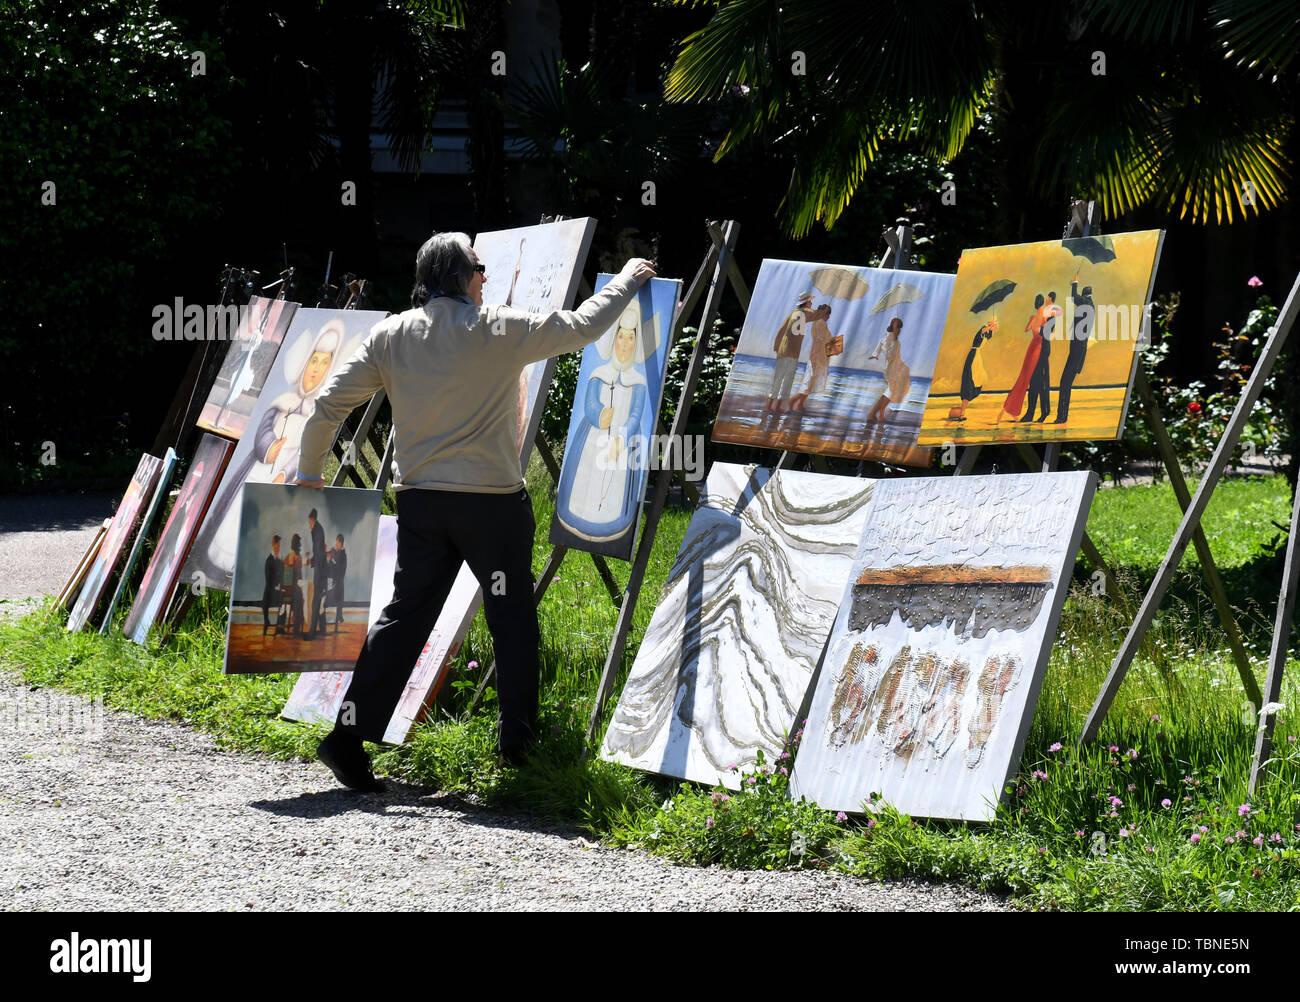 Artist man selling copies of well known art works paintings in Stresa, Italy, 2019 Stock Photo